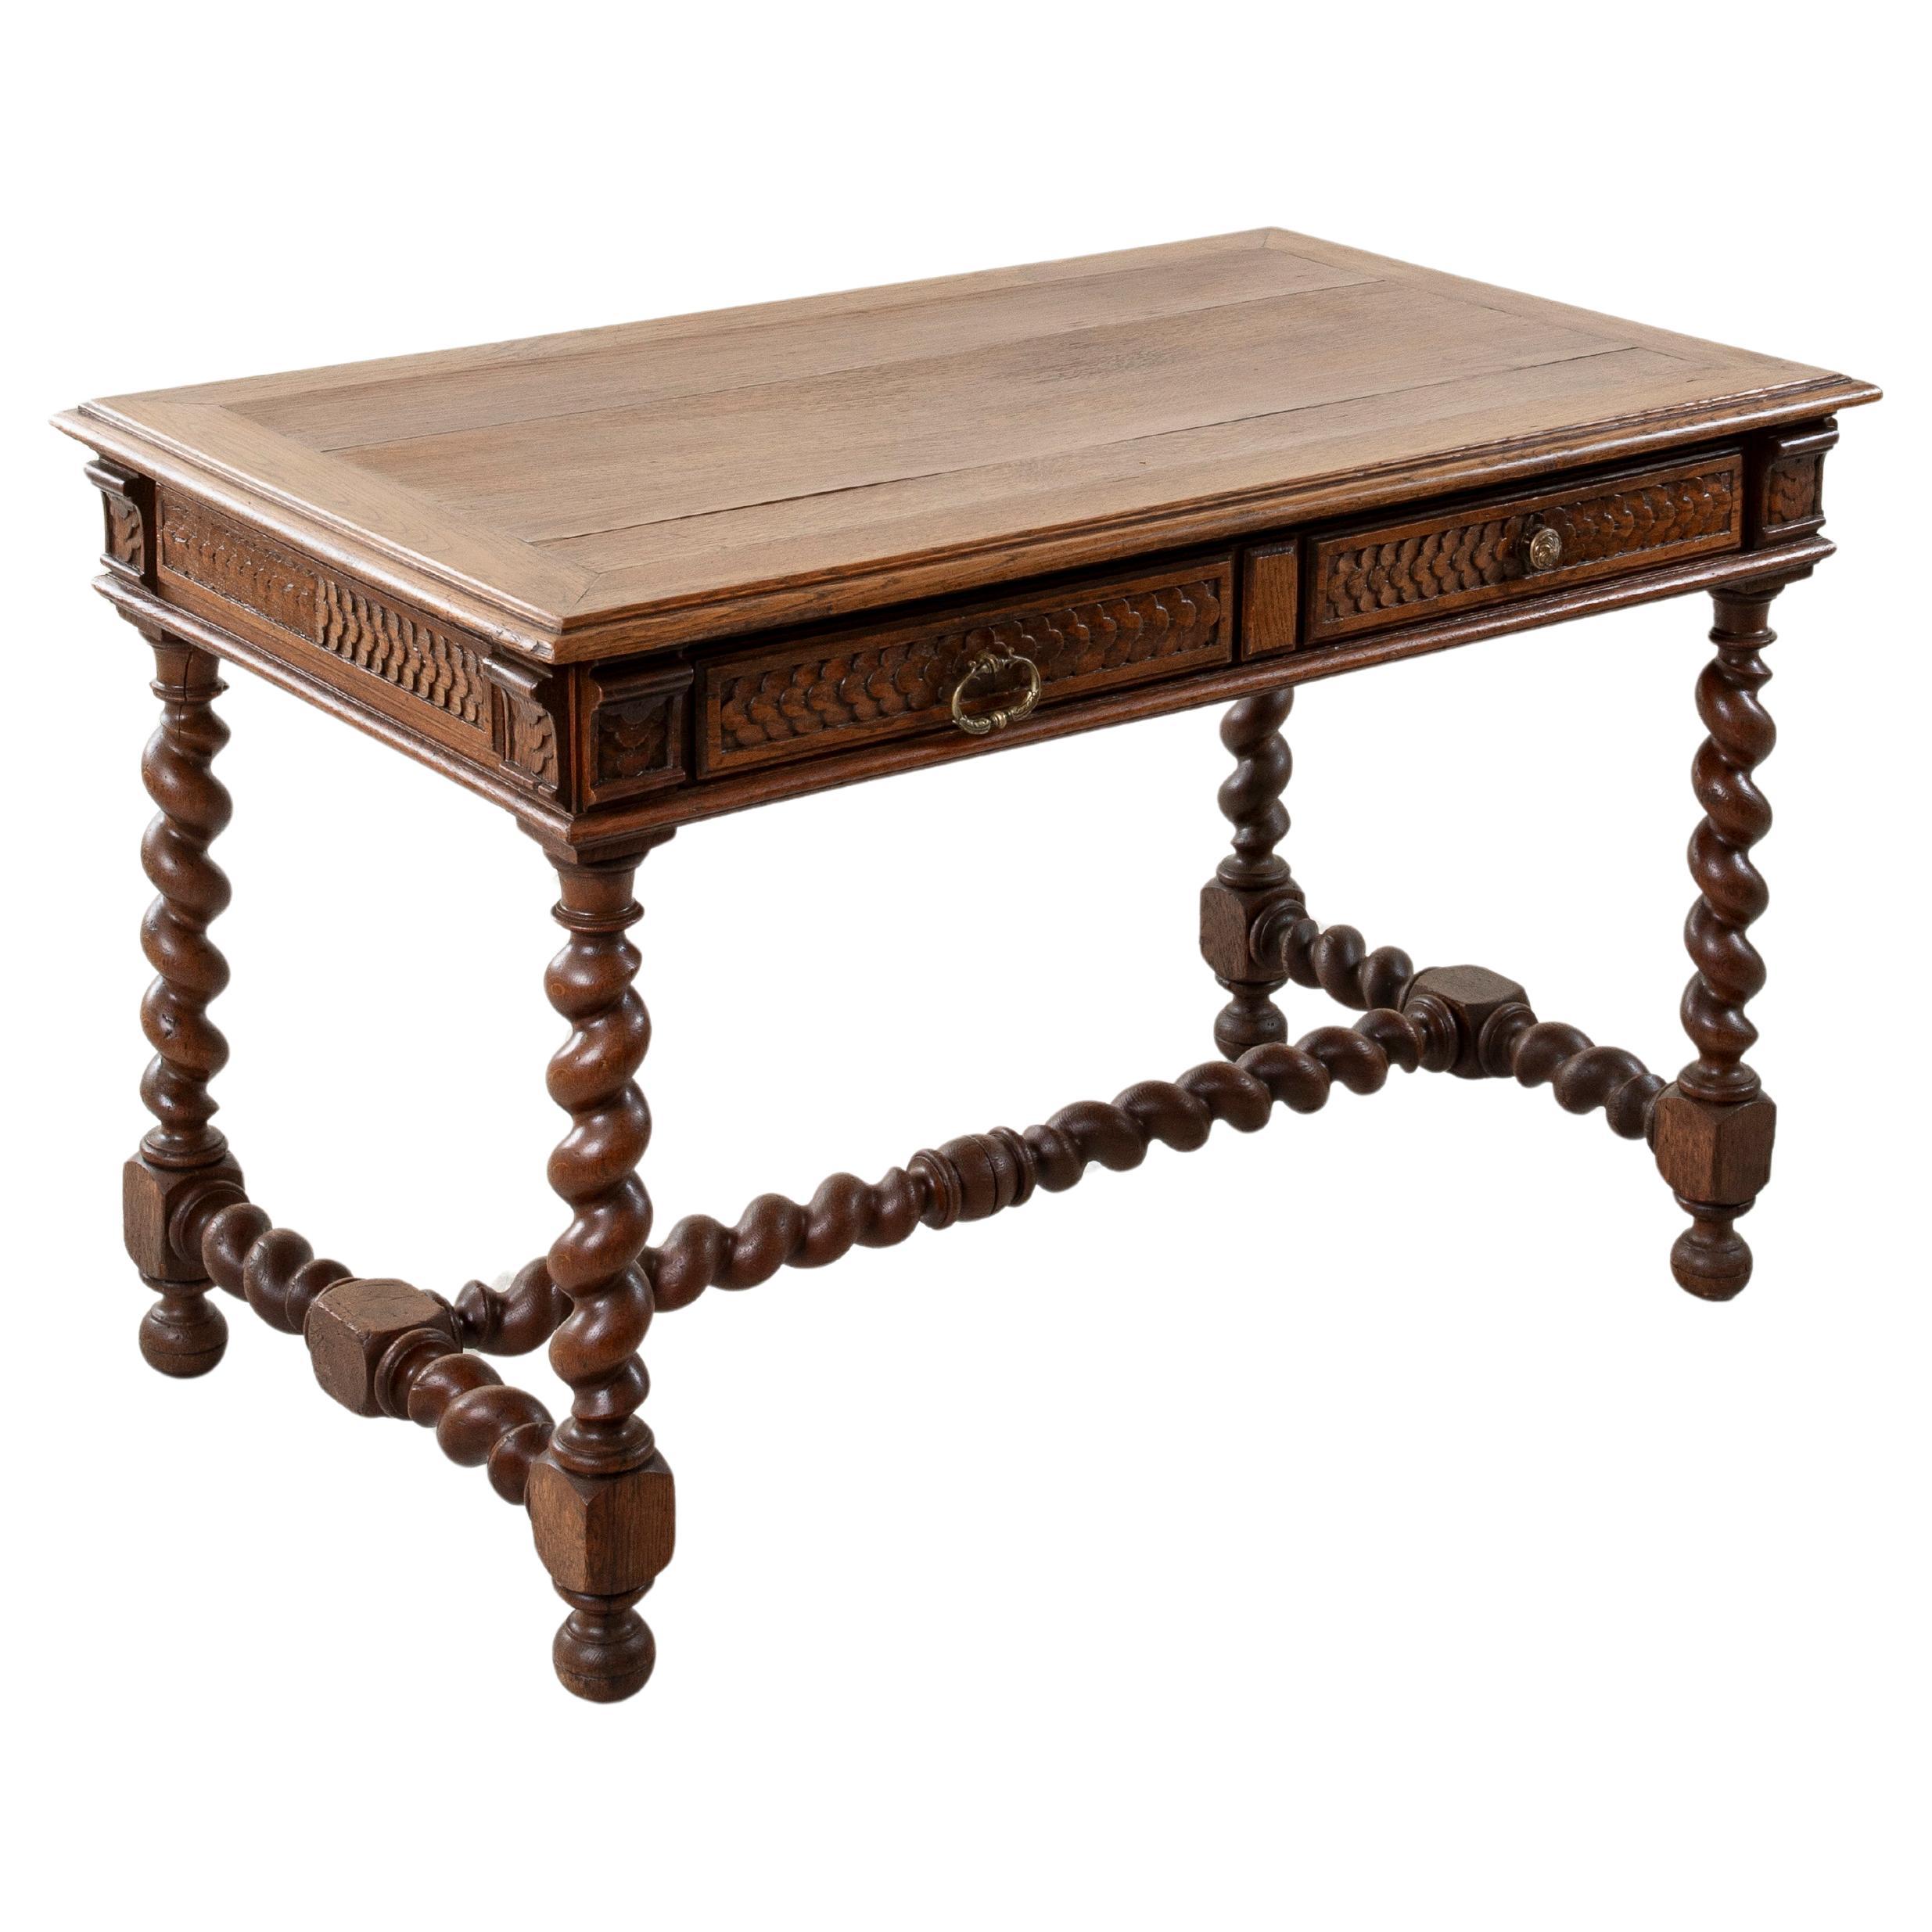 Late 19th Century French Louis XIII Style Hand Carved Oak Desk, Writing Table